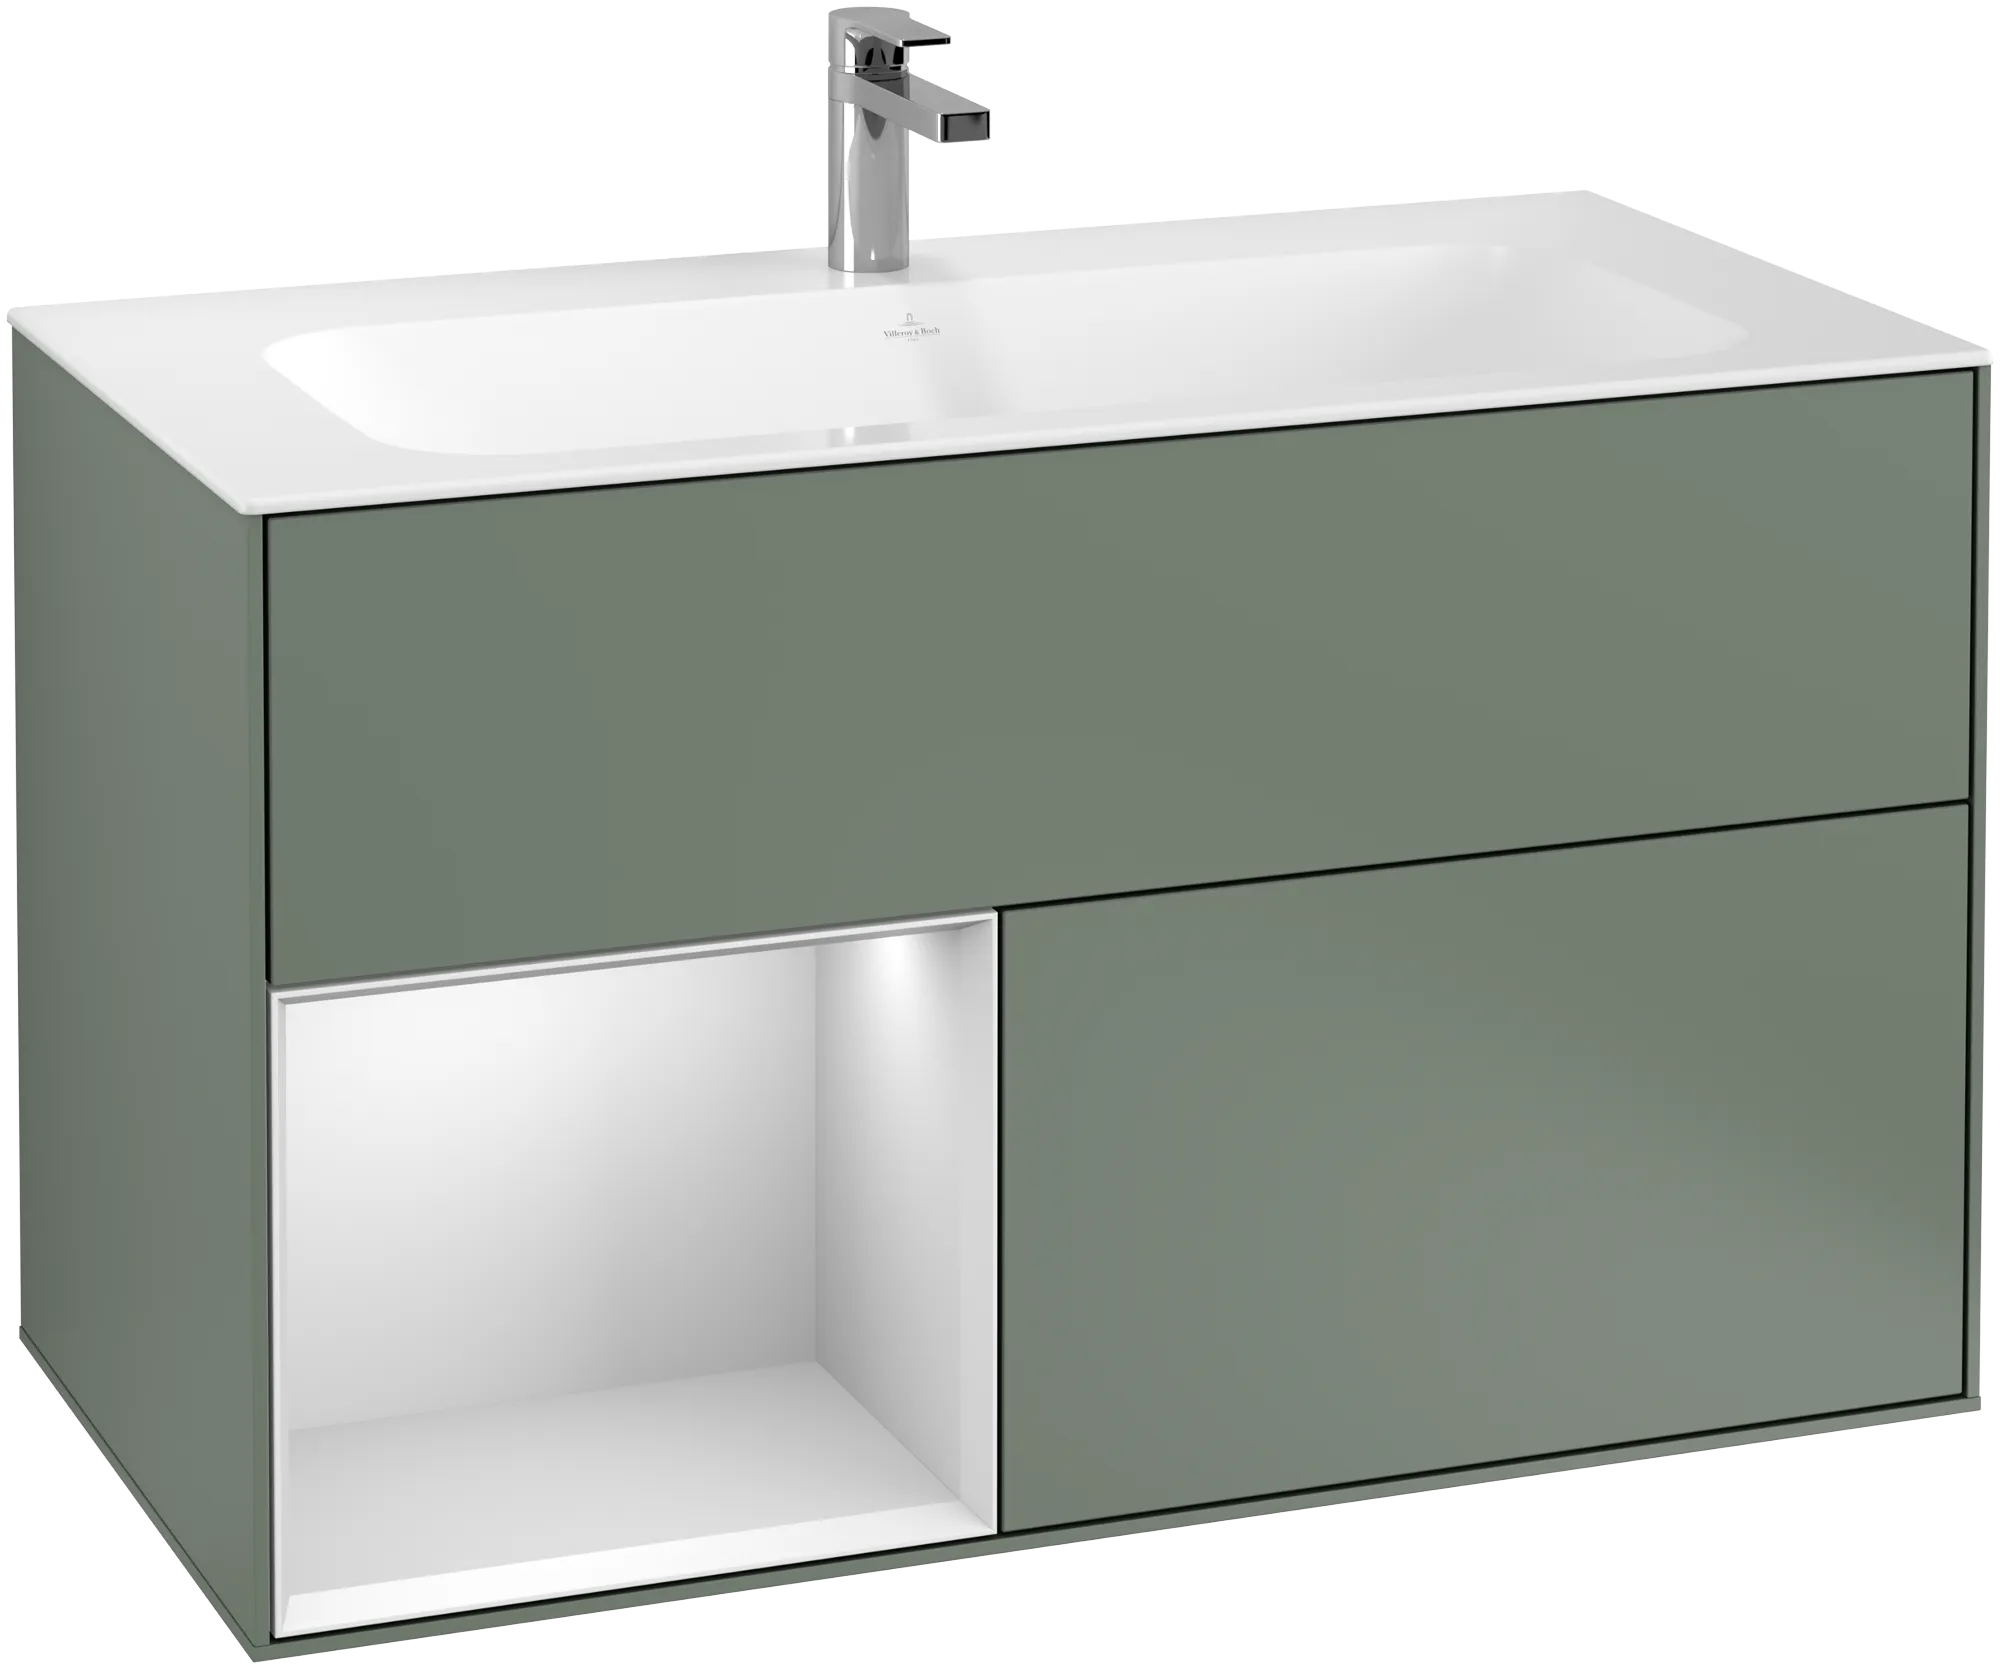 Зображення з  VILLEROY BOCH Finion Vanity unit, with lighting, 2 pull-out compartments, 996 x 591 x 498 mm, Olive Matt Lacquer / White Matt Lacquer #G030MTGM